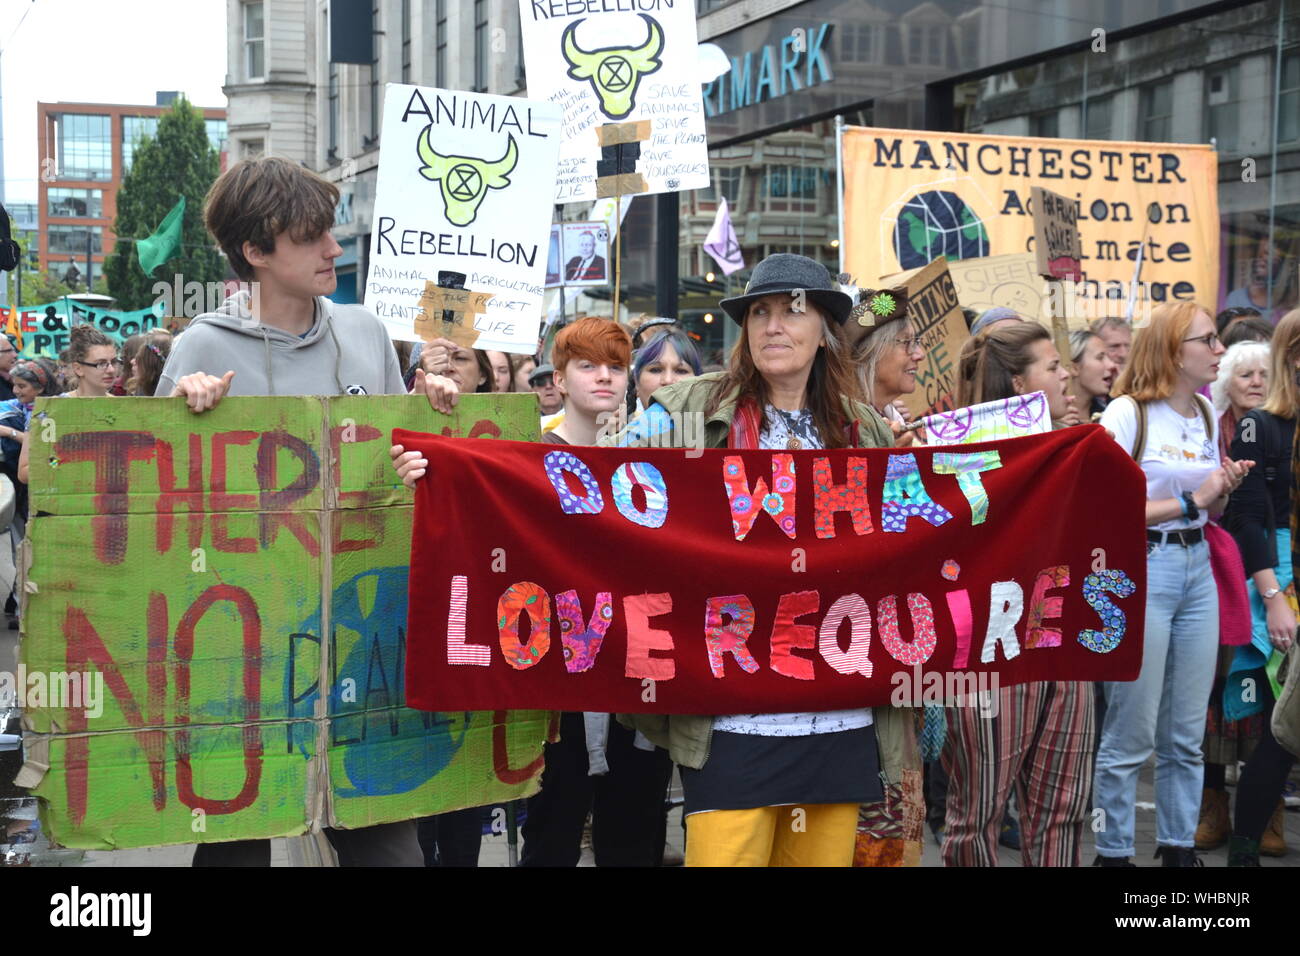 Northern Rebellion protesters, part of the global movement Extinction Rebellion, marched through Manchester, uk, and held a series of die-ins to urge for action on climate change on September 2nd, 2019. Protest sites included Barclays Bank, a Primark store and HSBC Bank. This was the fourth day of a protest which blocked Deansgate, a main road in central Manchester. Stock Photo